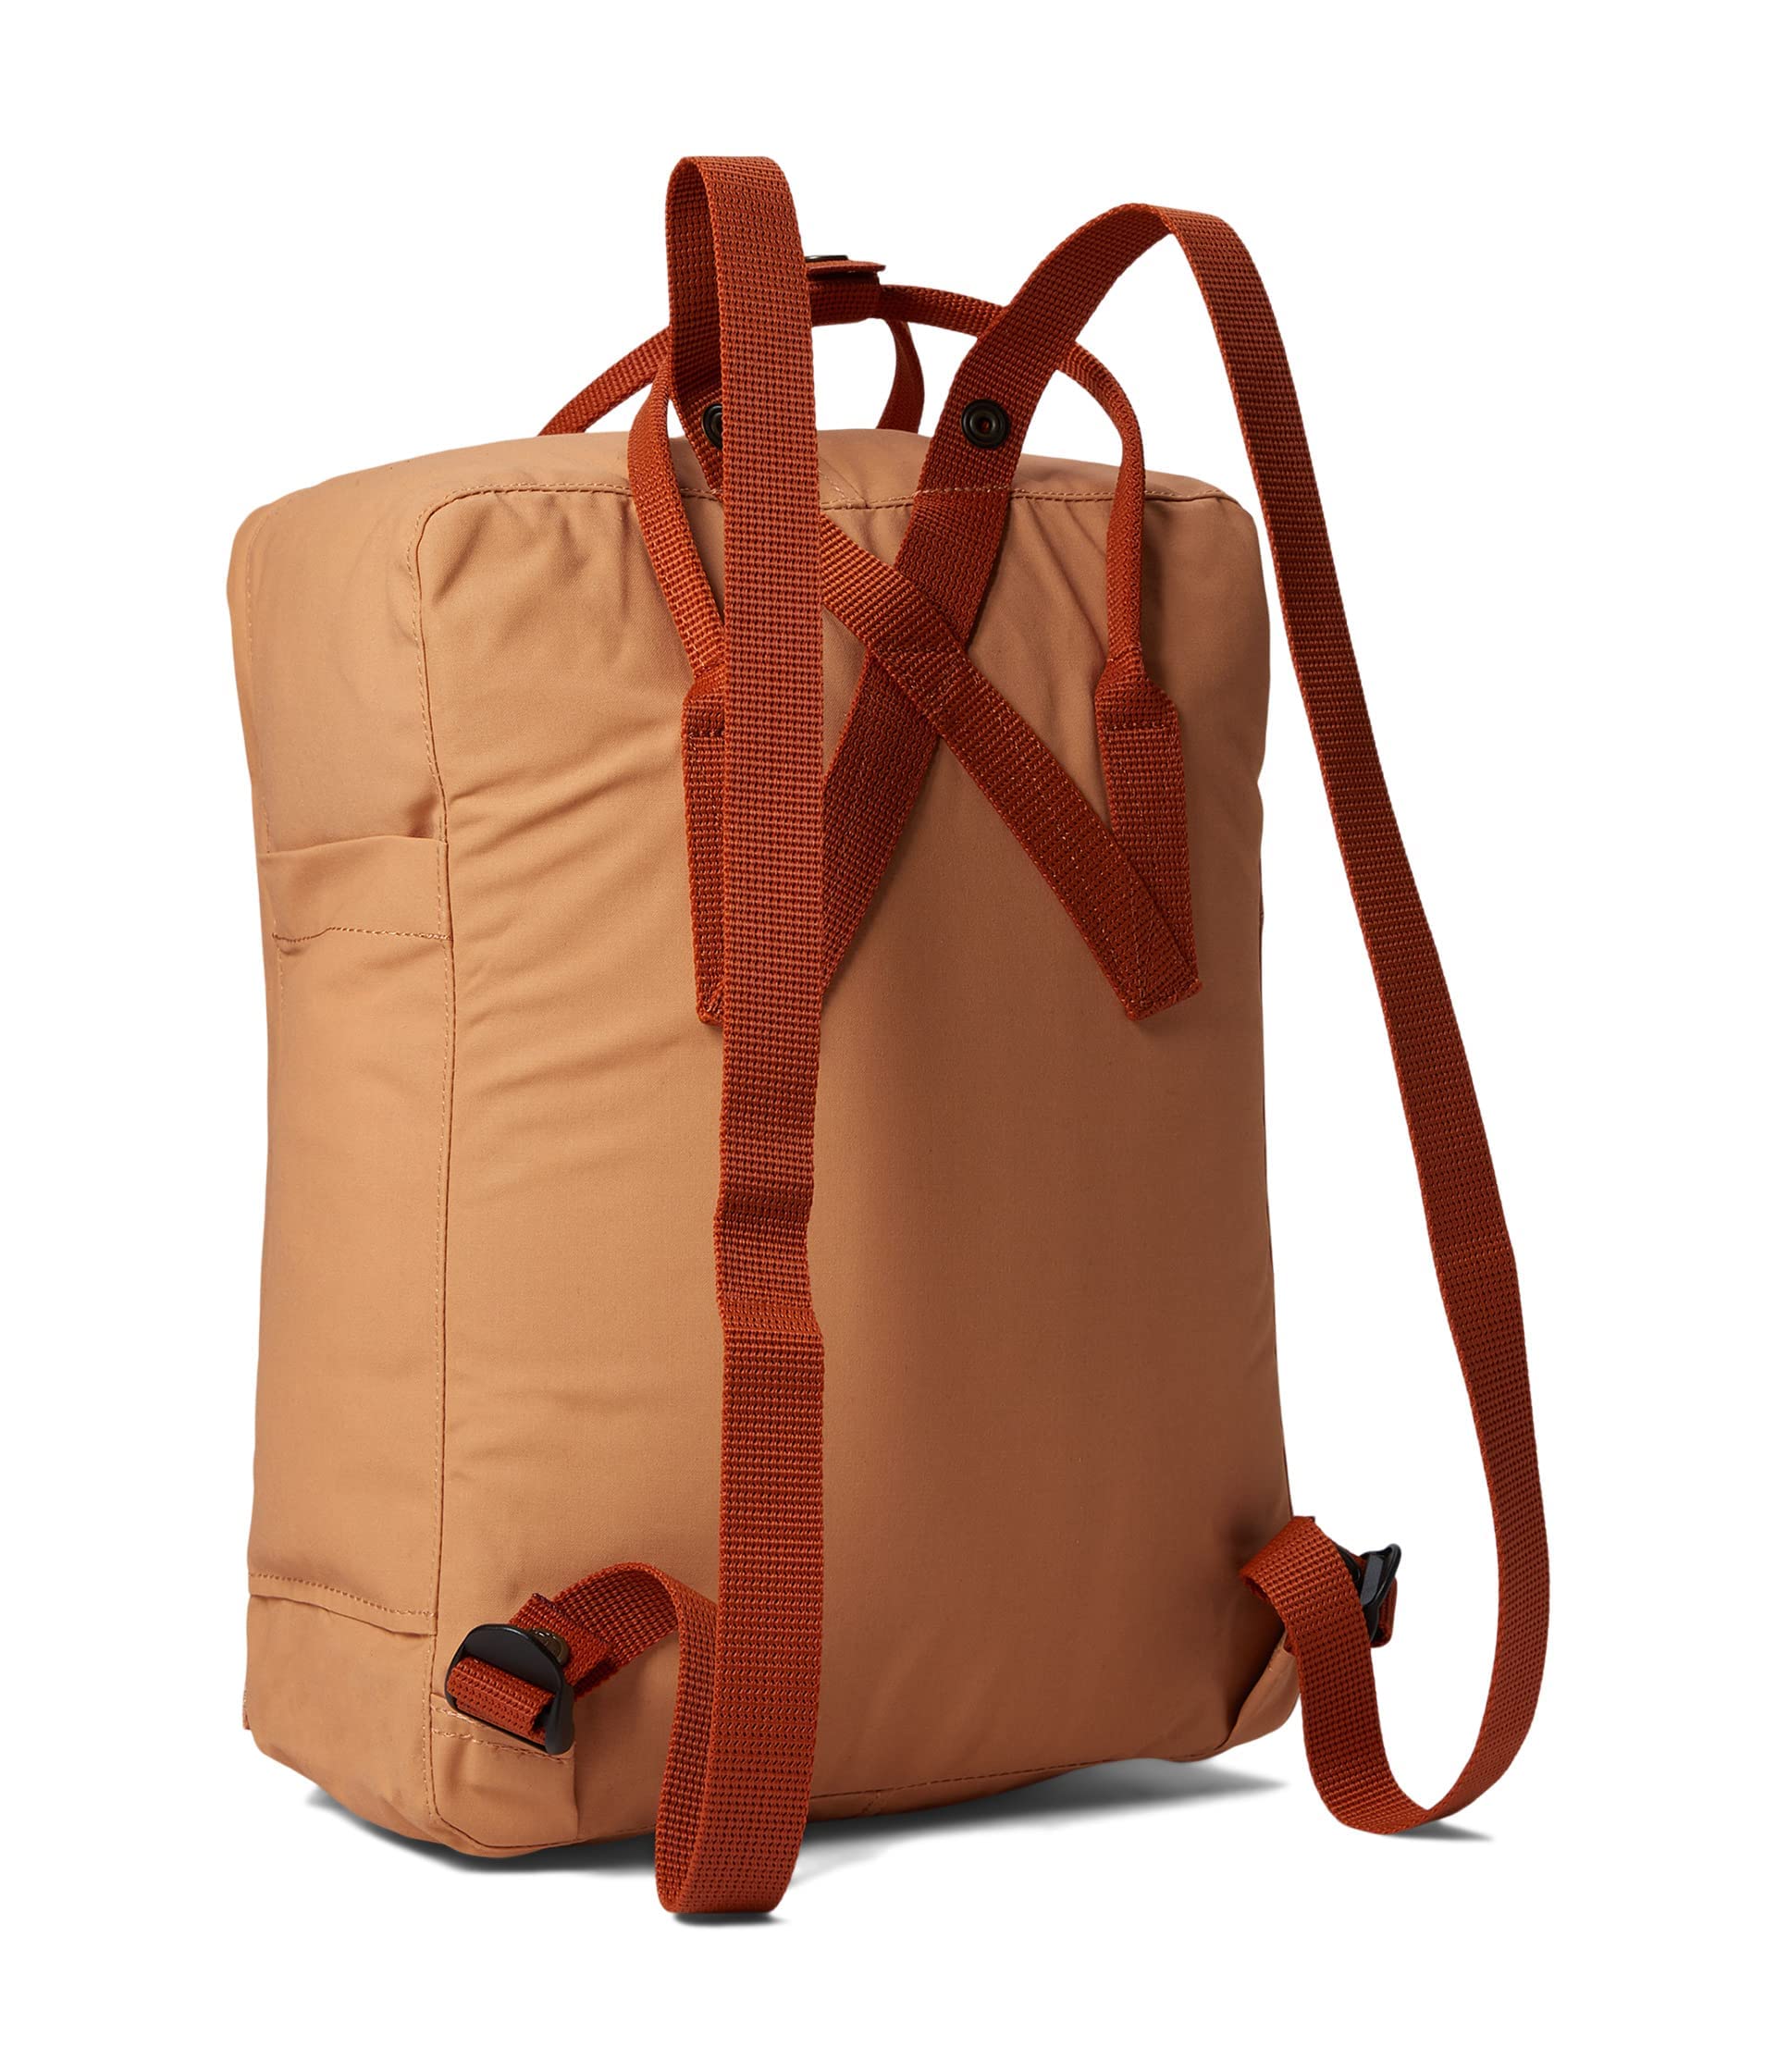 Fjällräven Kånken Backpack for Men, and Women - Lightweight Rugged Vinylon Fabric, Dual Top Handles with Snap Closure, and Classy Look Peach Sand/Terracotta Brown One Size One Size